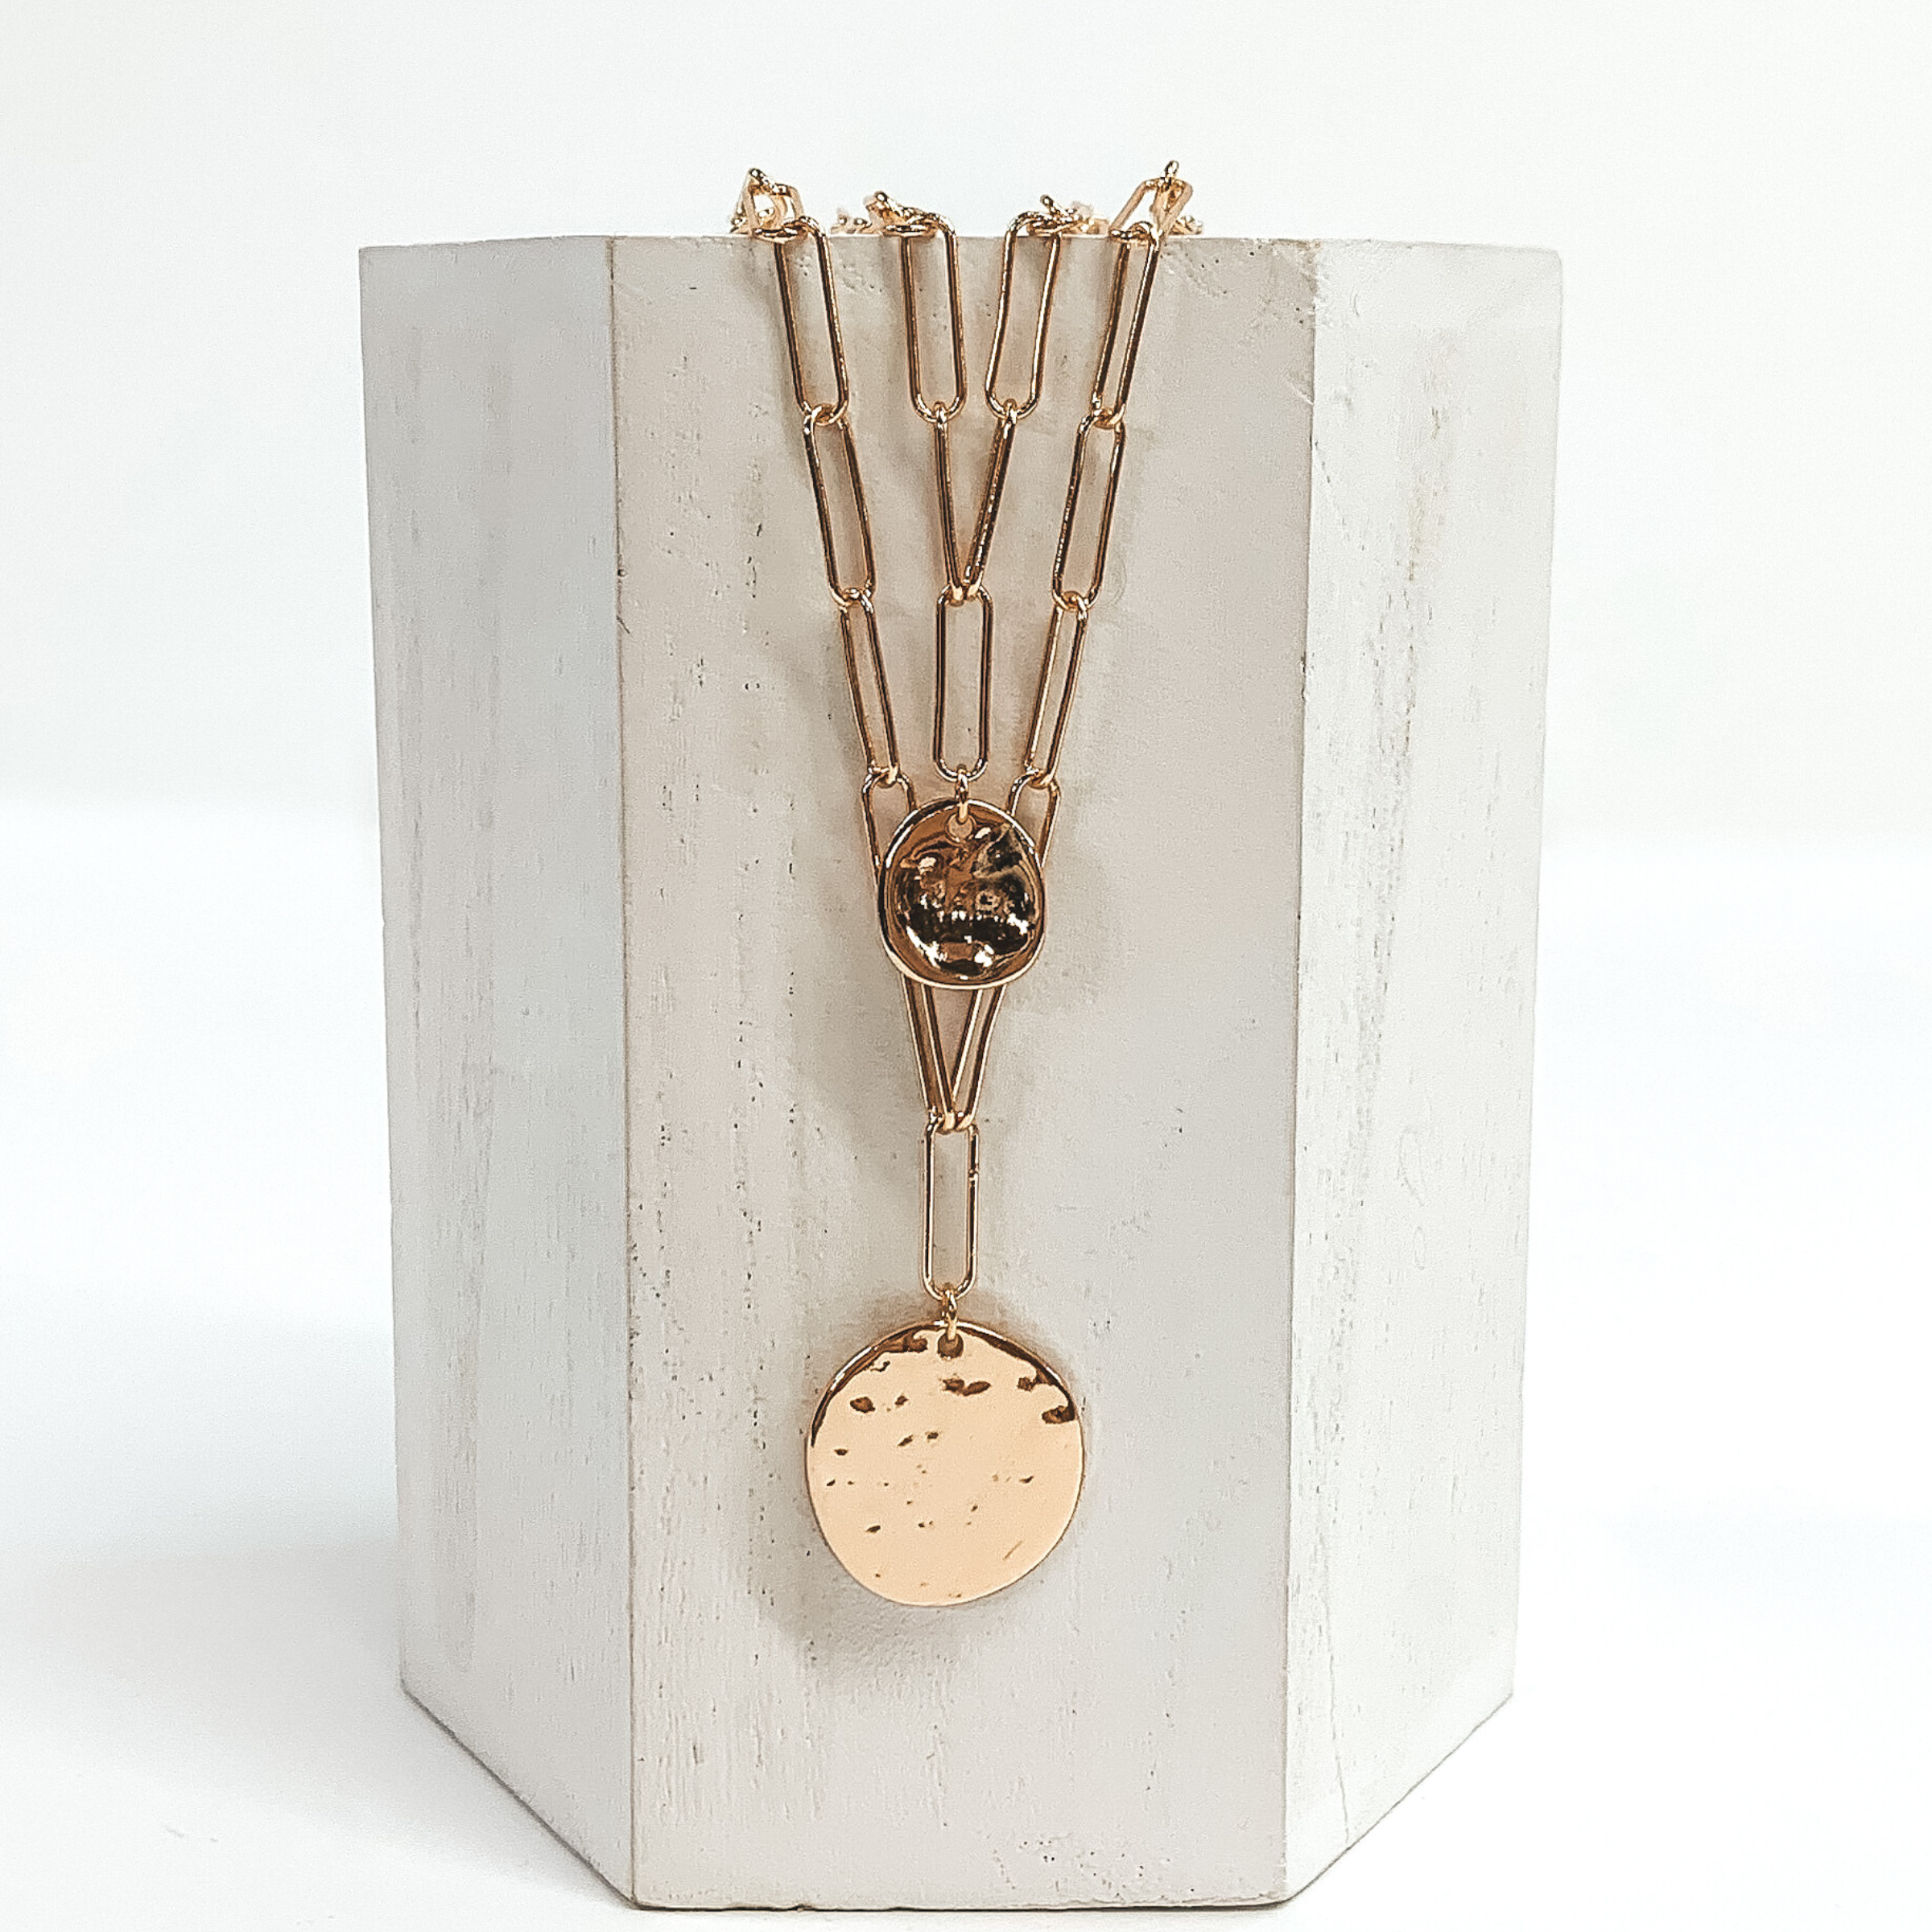 Double layered gold chain necklace with two circle pendants. The pendants have a hammered texture and there is a small one on the shorter strand and a bigger circle on the longer strand. This necklace is pictured on a white block with a white background.